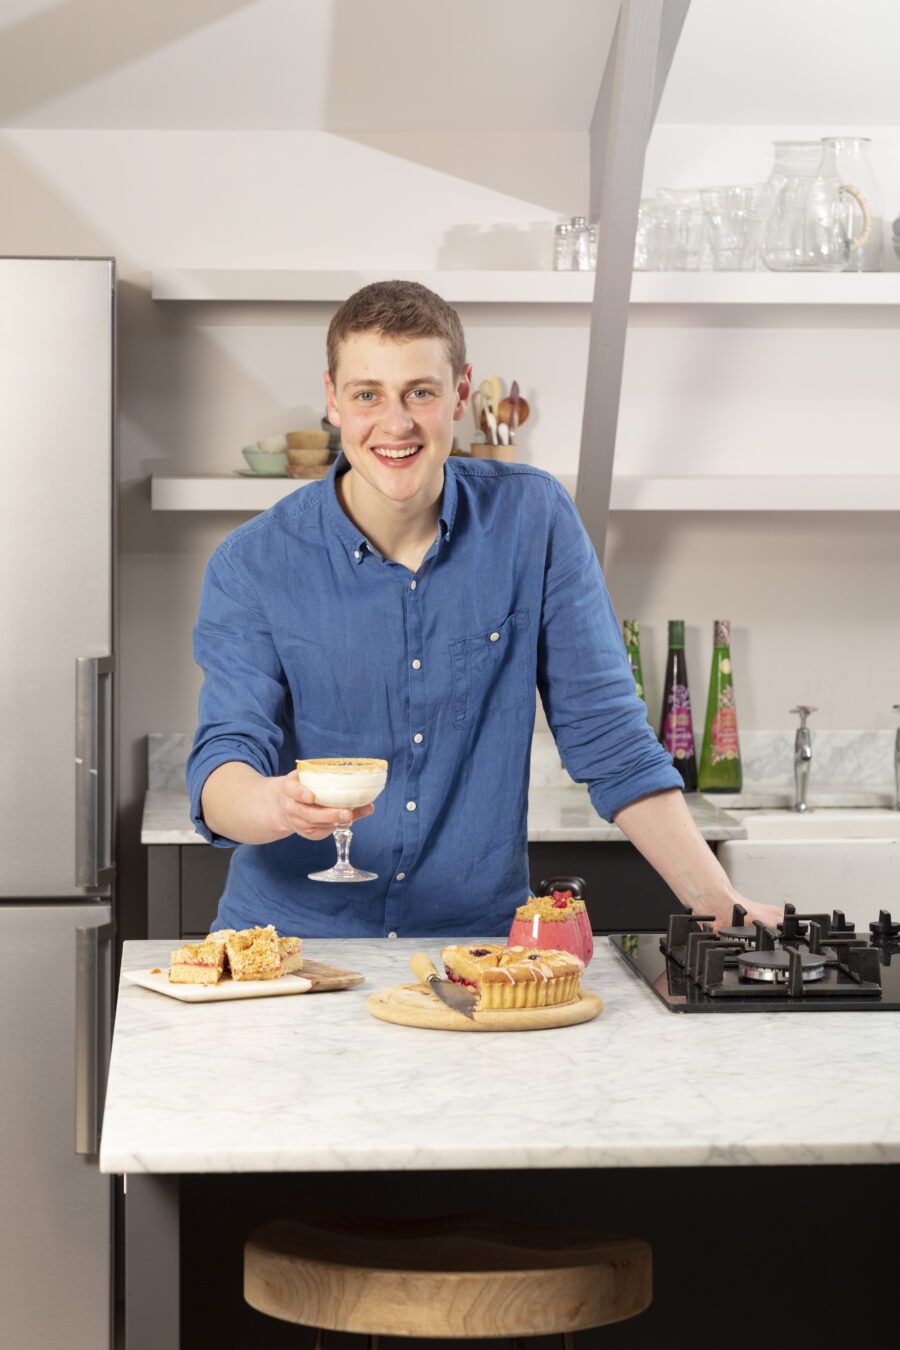 3 recipes from Great British Bake Off 2020 winner, Peter Sawkins